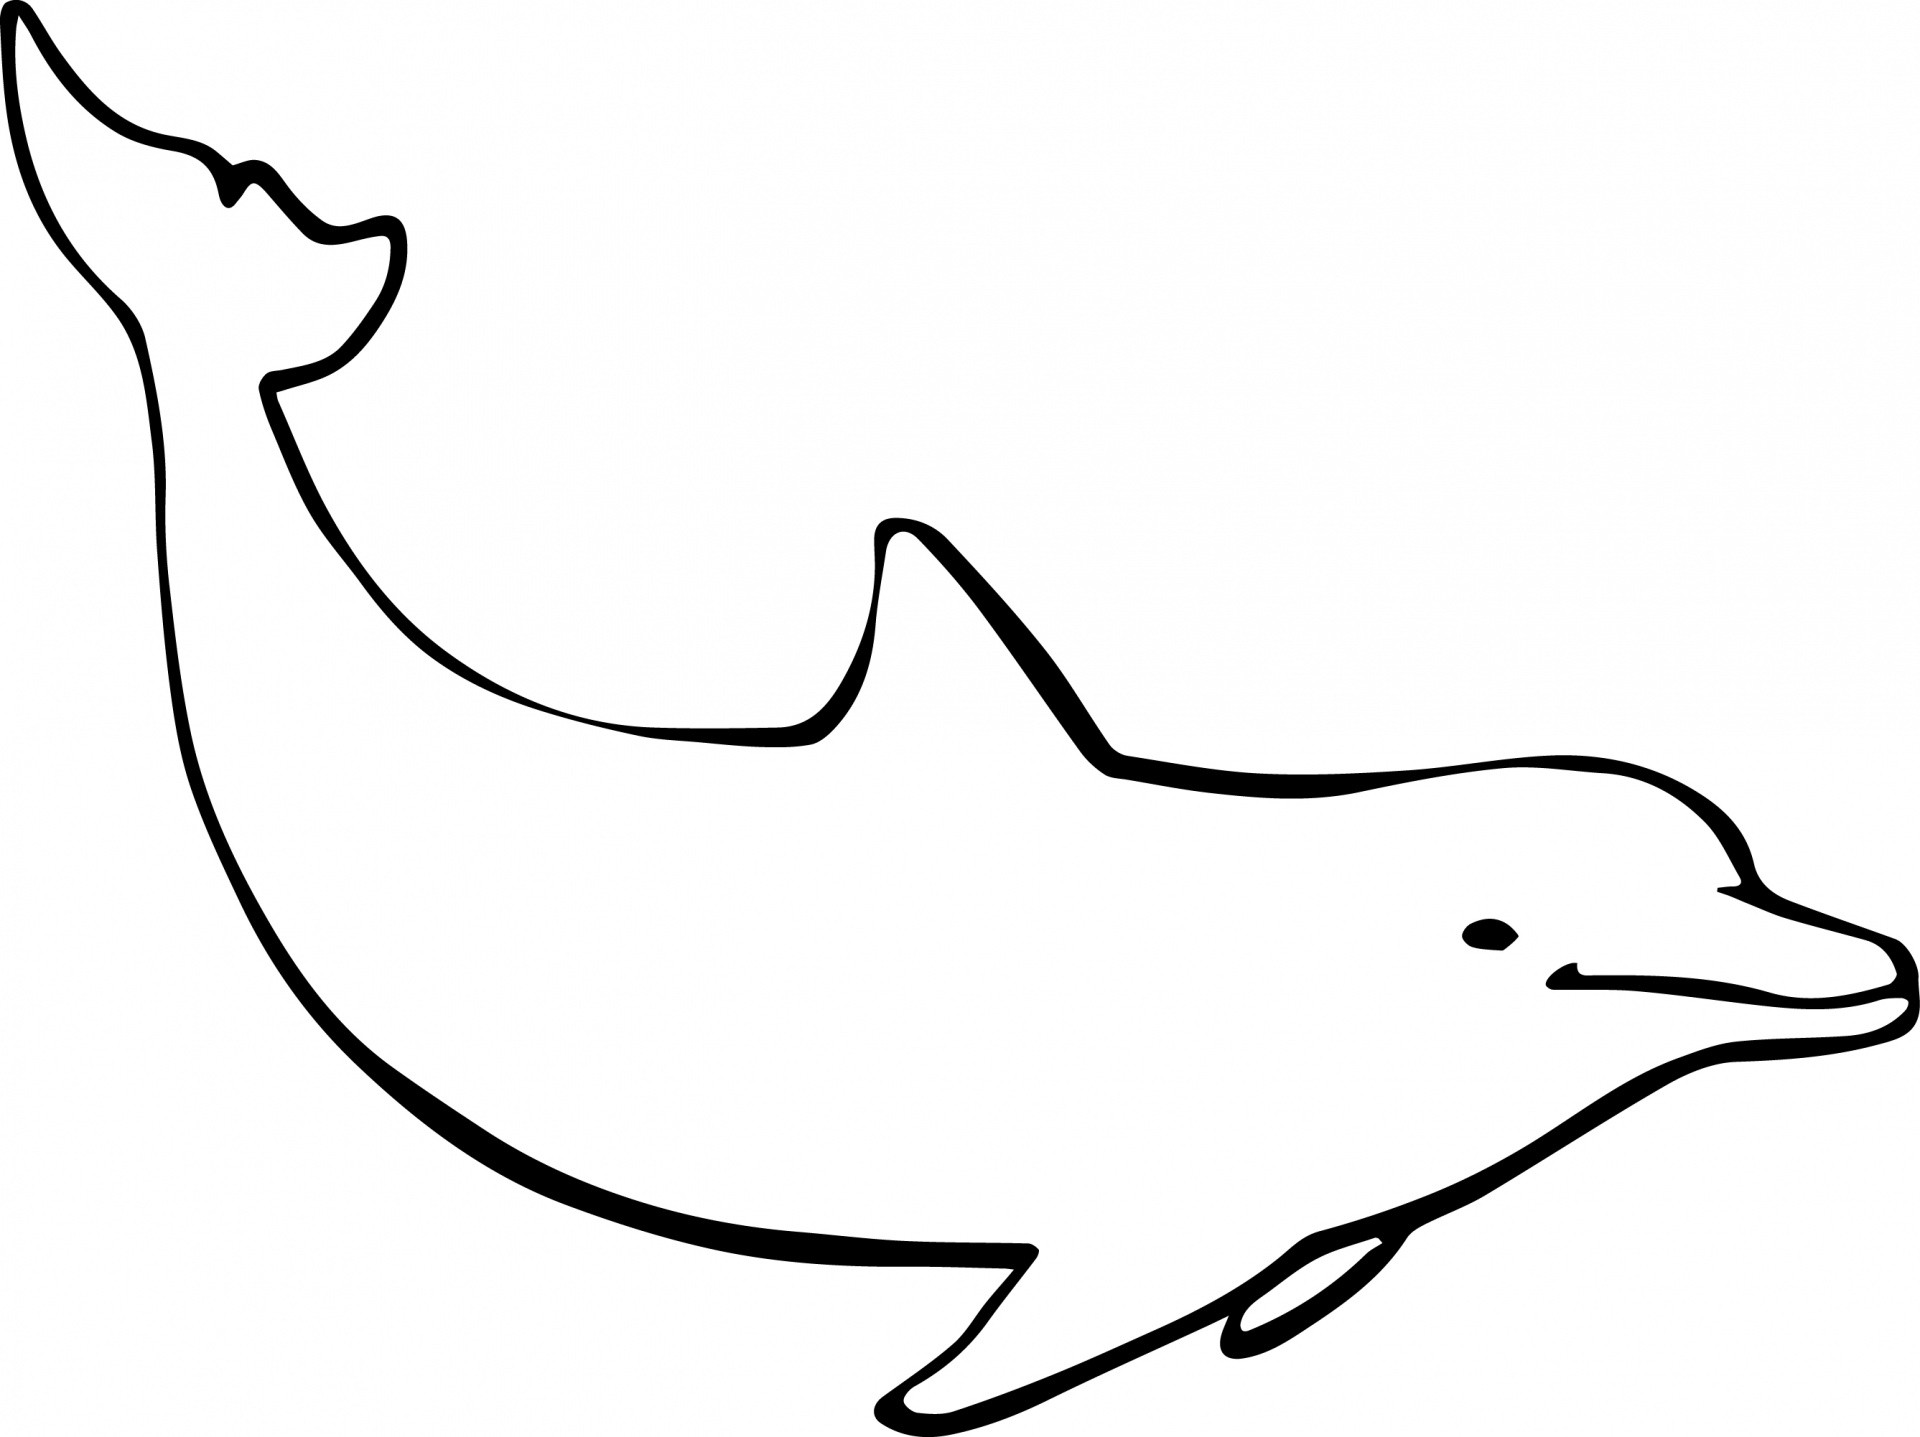 Drawing free download best. Clipart dolphin easy